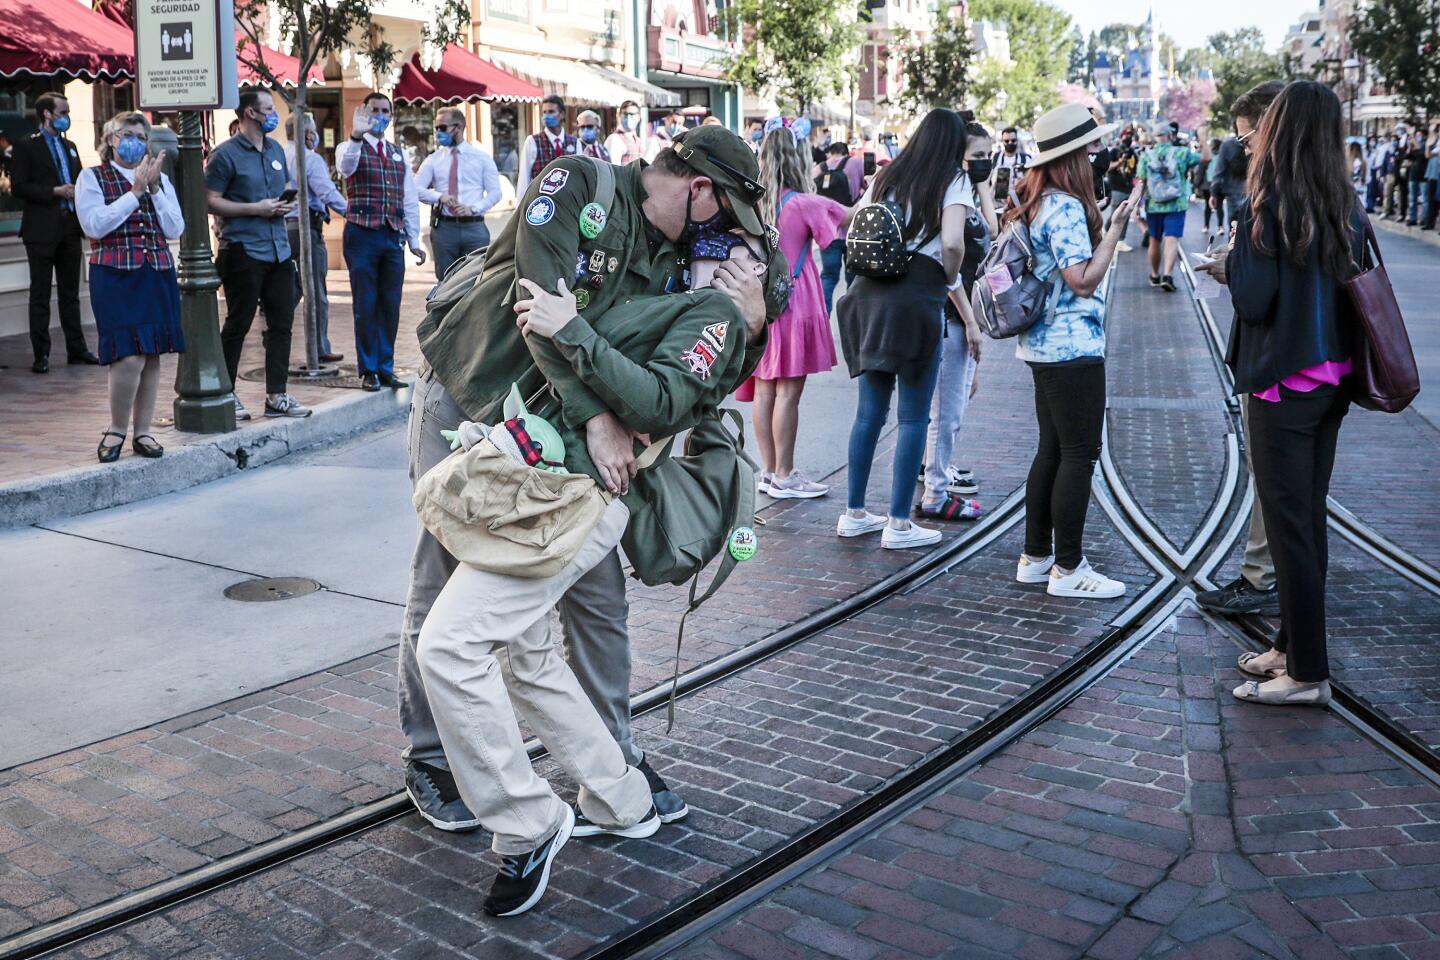 ANAHEIM CA APRIL 30, 2021 - A couple recreate the famous Alfred Eisenstaedt V-J Day photo inside Disneyland as the theme park reopens for the first time in more than a year on Friday, April 30, 2021. The reopening of Disneyland, which was shut down in March of last year due to the COVID-19 pandemic. ``is a monumental day for Anaheim,'' city spokesman Mike Lyster said.(Robert Gauthier / Los Angeles Times)